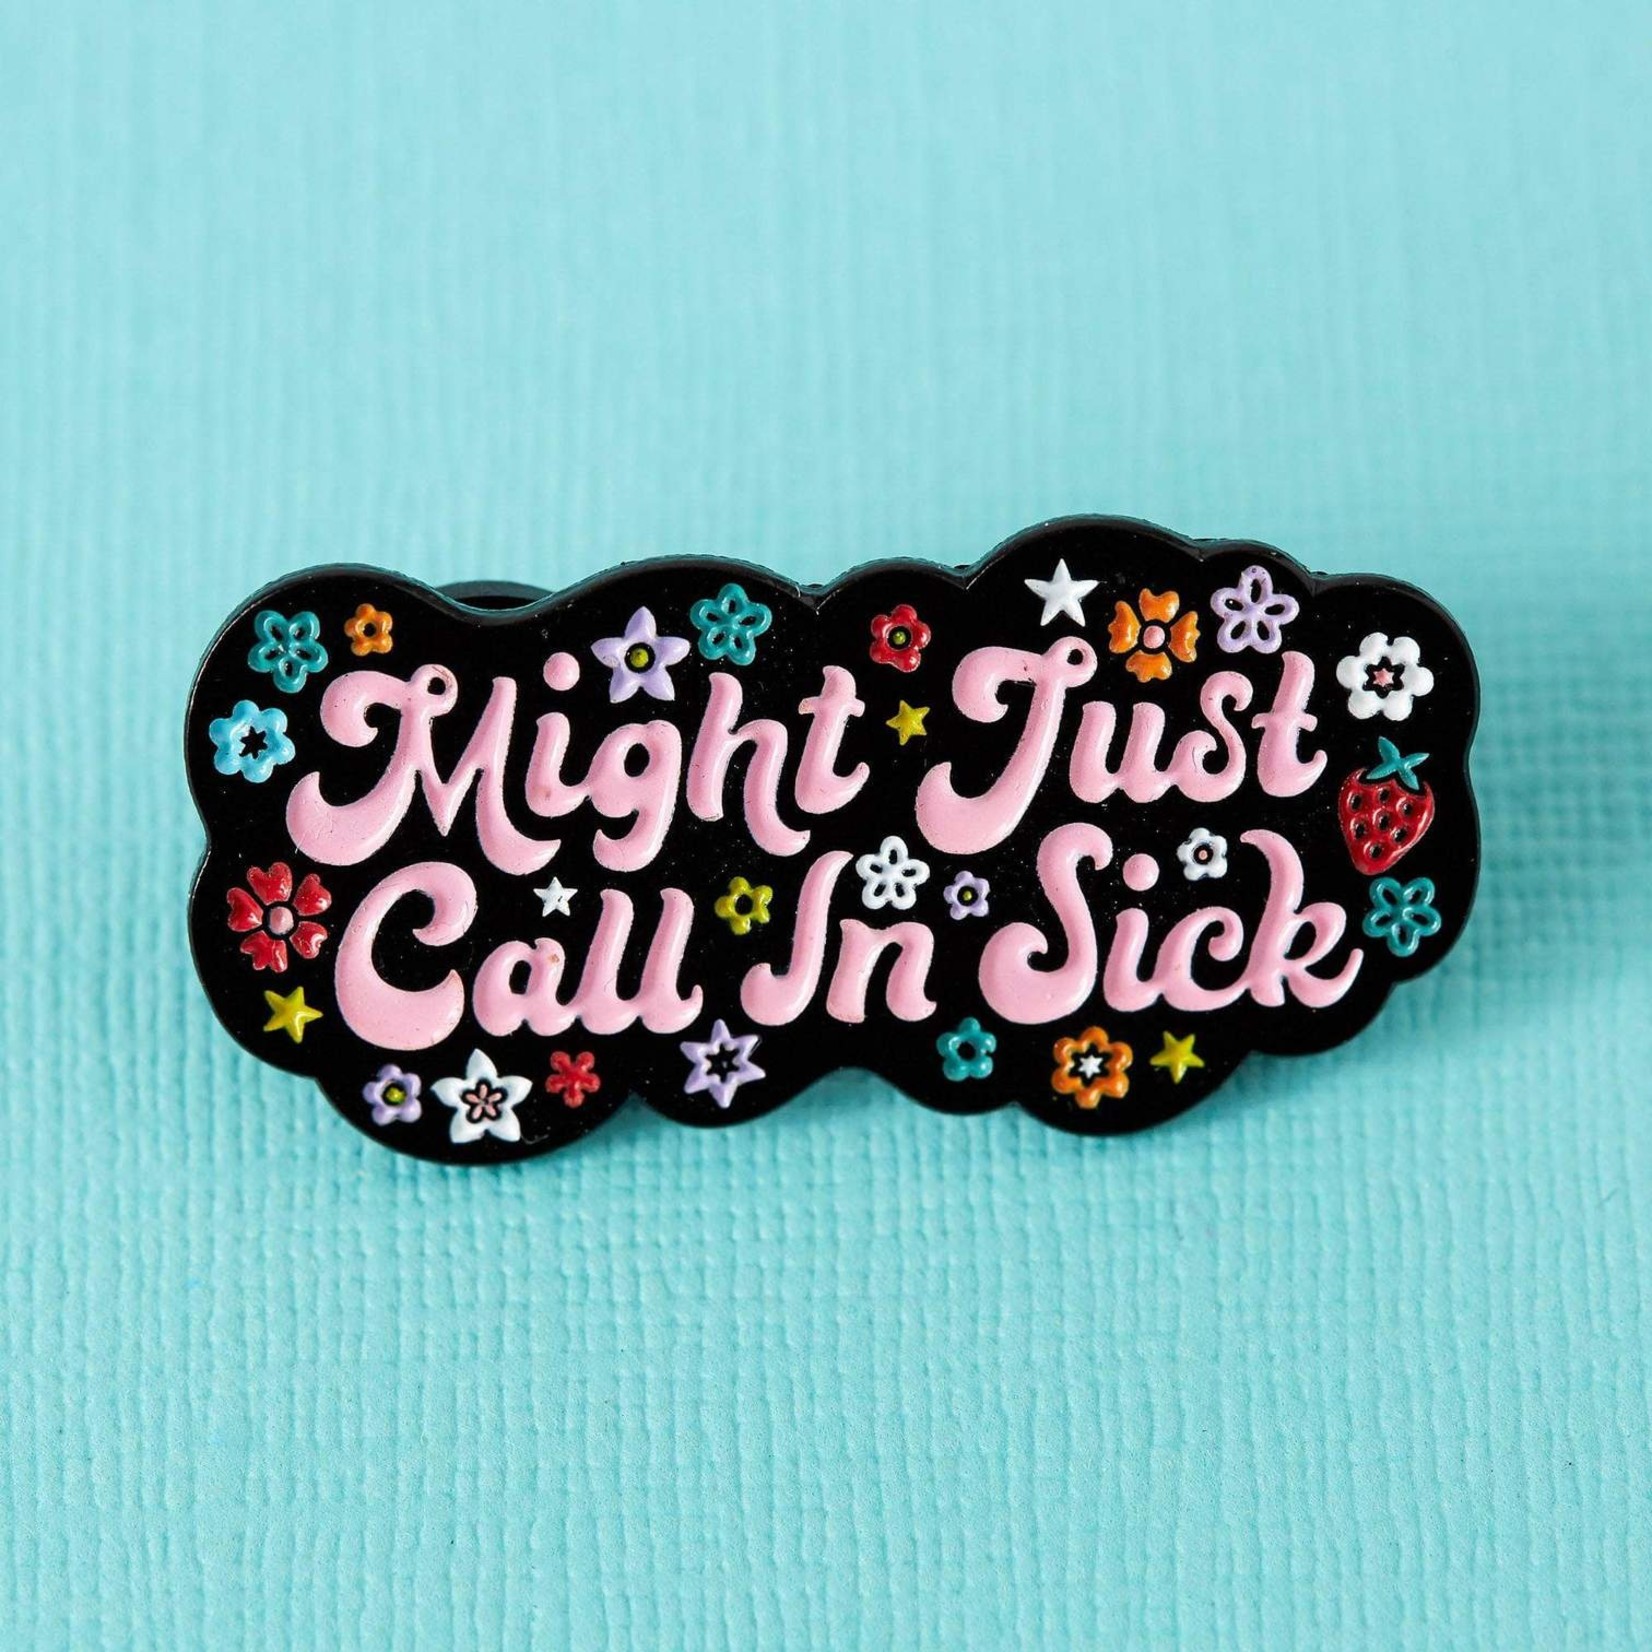 Punky Pins Might Just Call In Sick pin